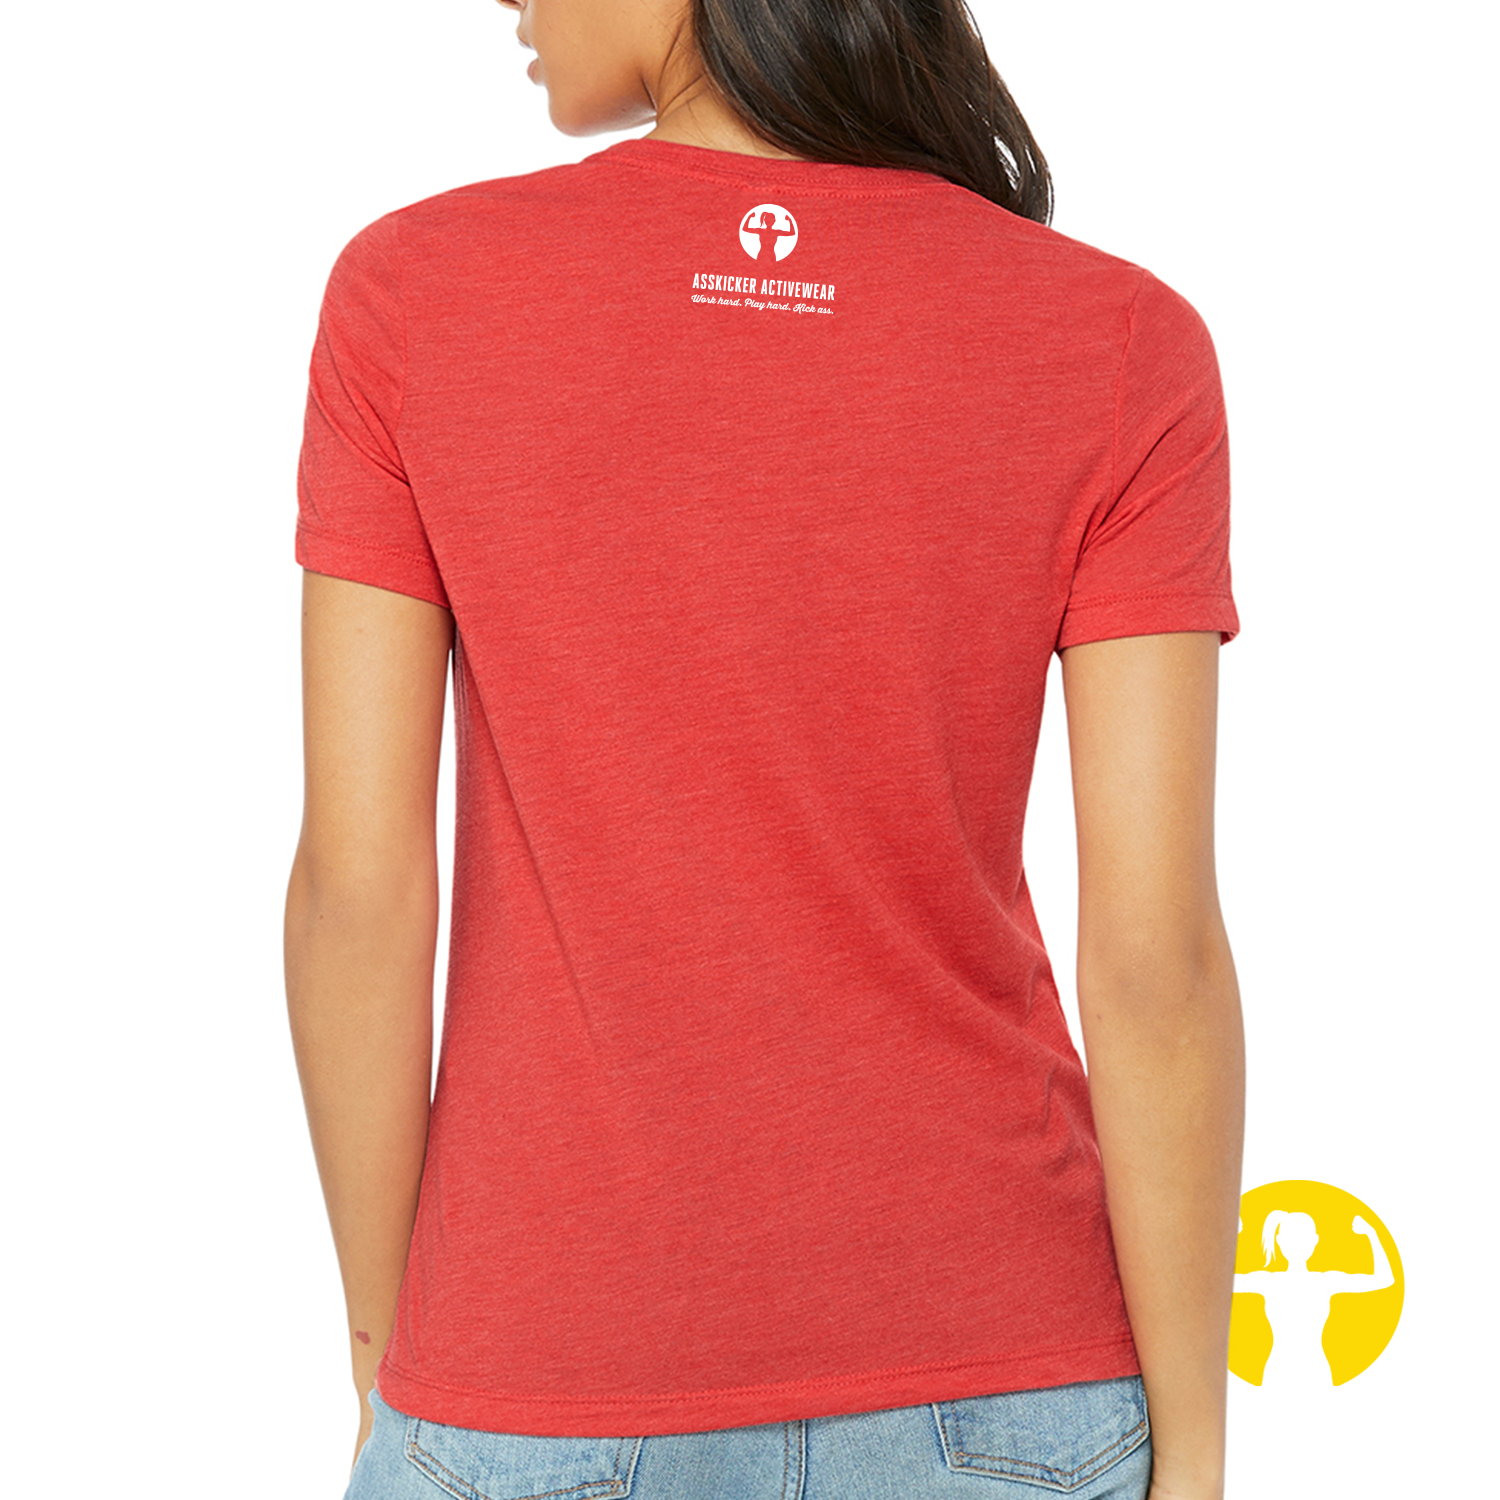 True North Strong & Free - Canada Day Tee for Women